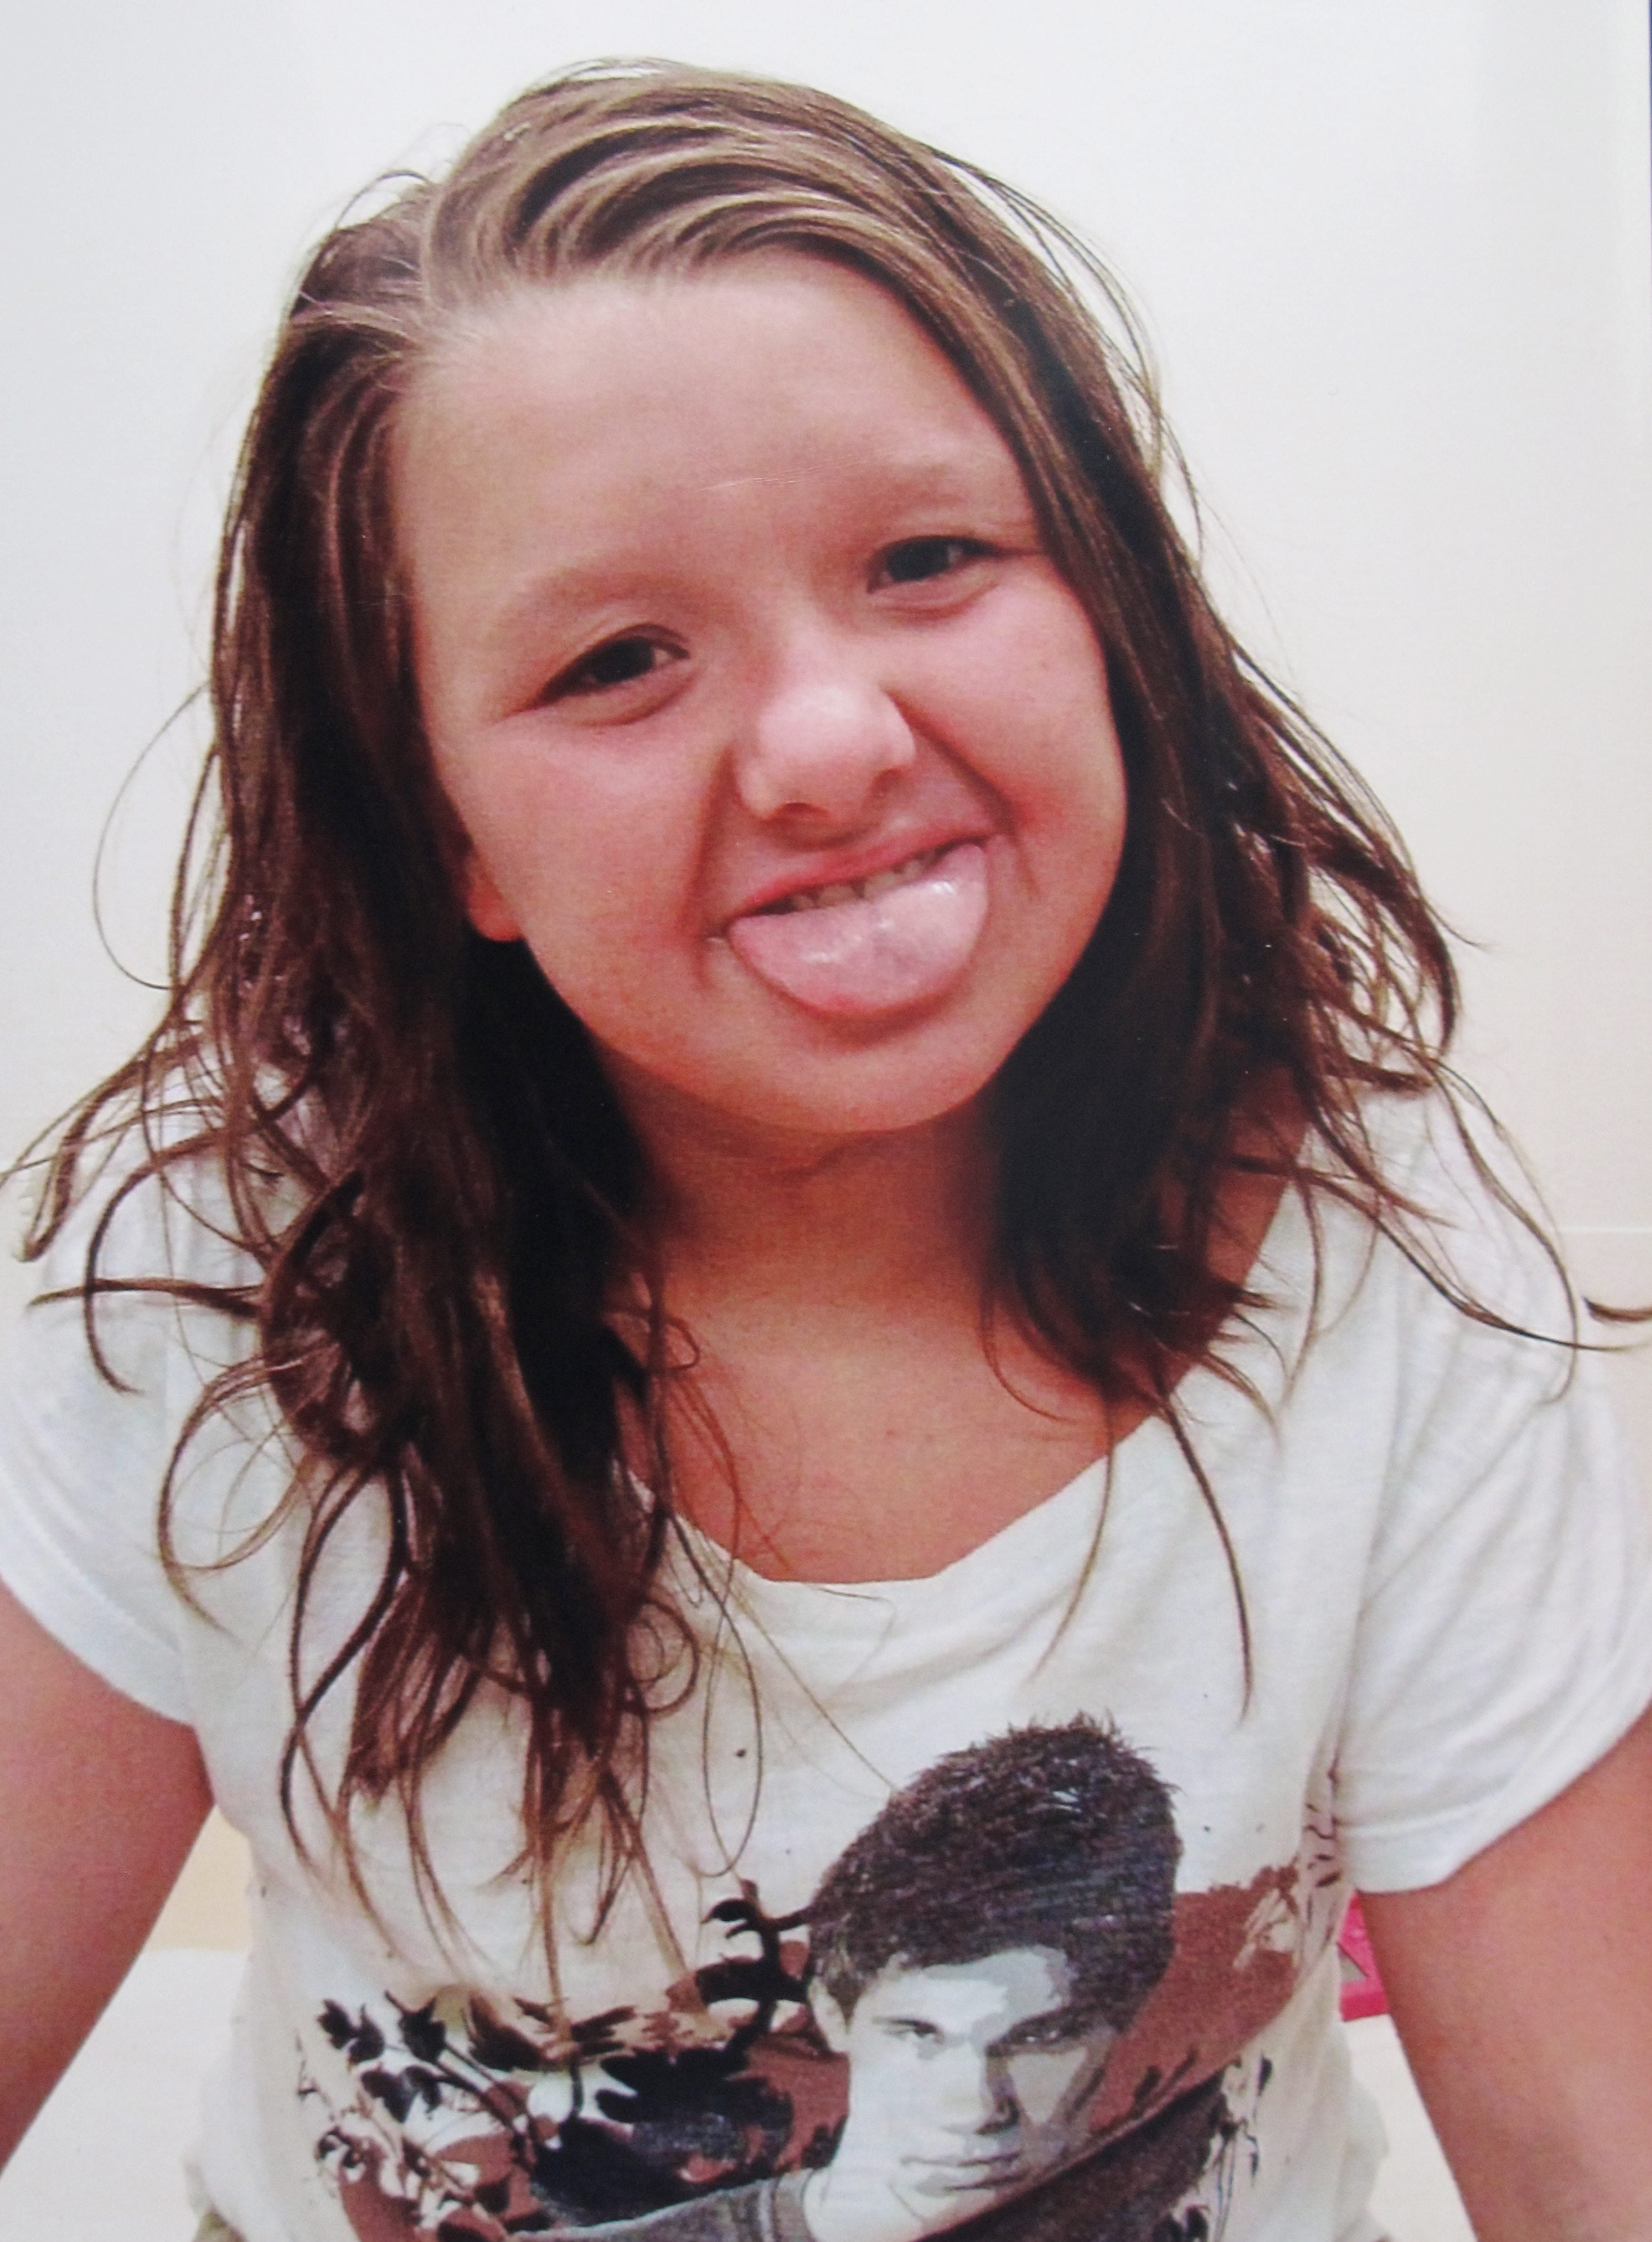 This undated photo provided by Tammy Weeks shows her daughter, Nicole Lovell, posing when she was 10 in Blacksburg, Va. The 13-year-old girl was found dead just across the state line in Surry County, N.C., and two Virginia Tech students are charged in the case.